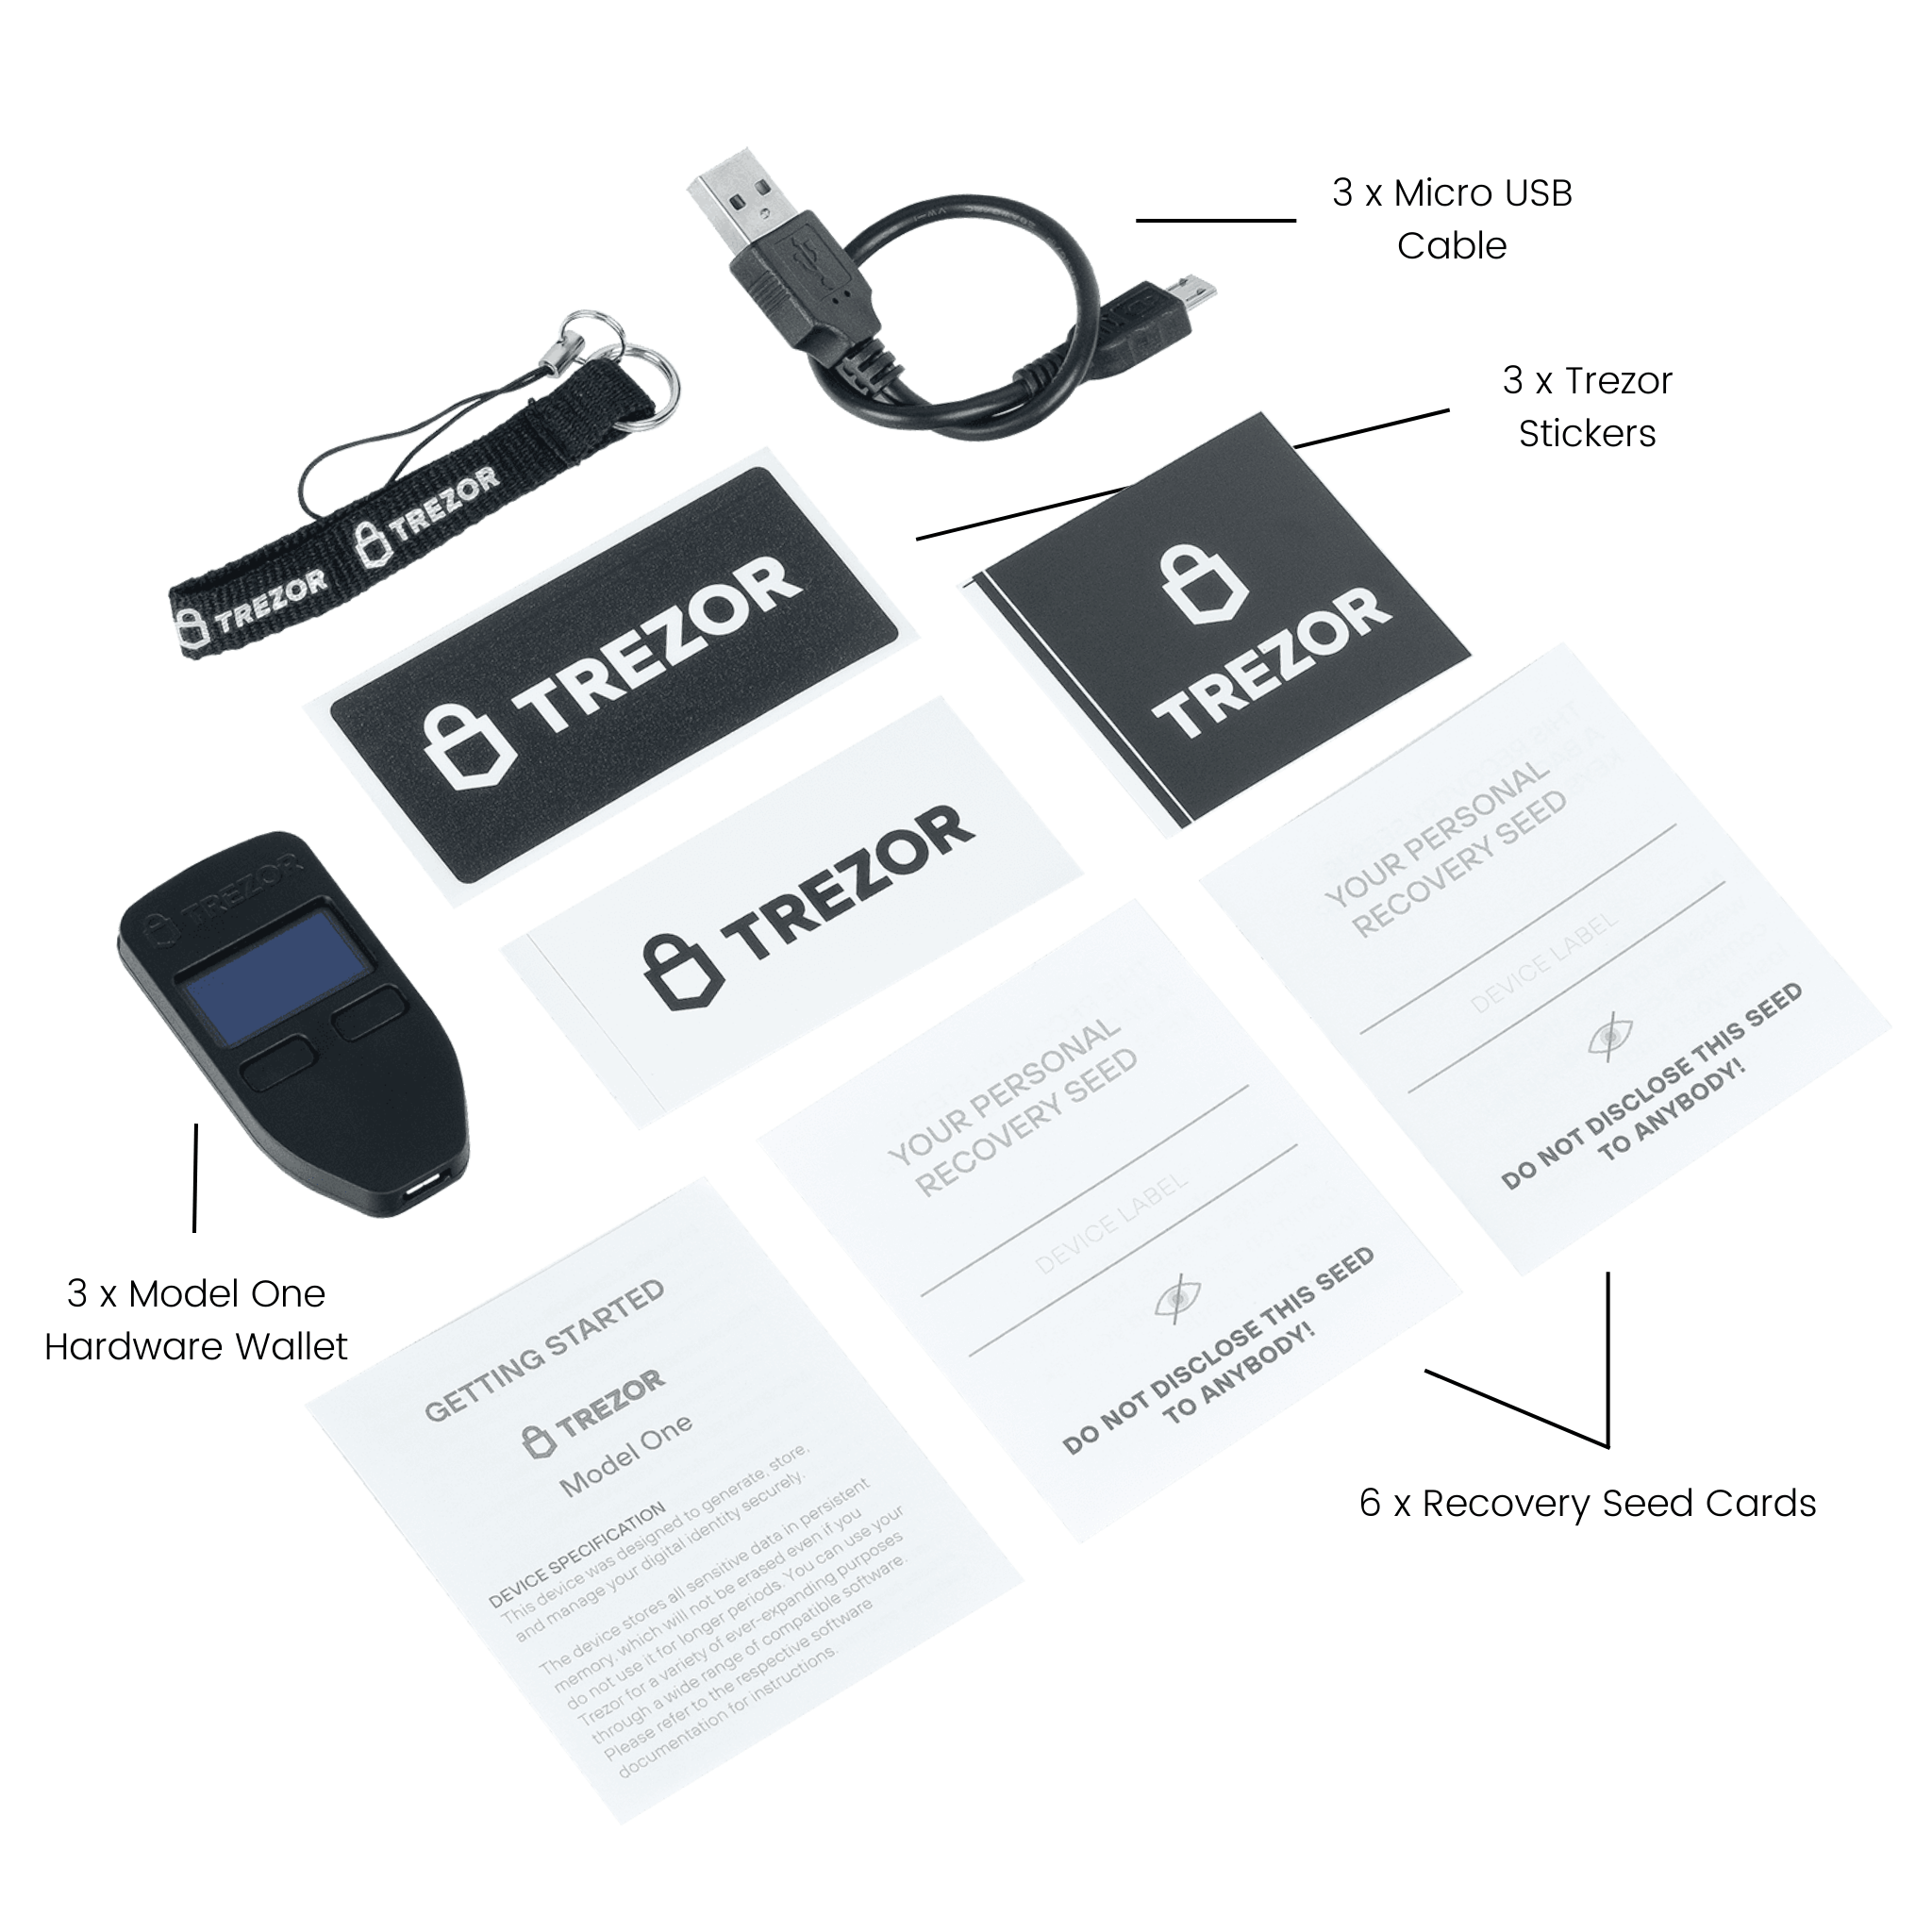 Trezor Model One Pack of 3 Cryptocurrency Hardware Wallets Package Contents